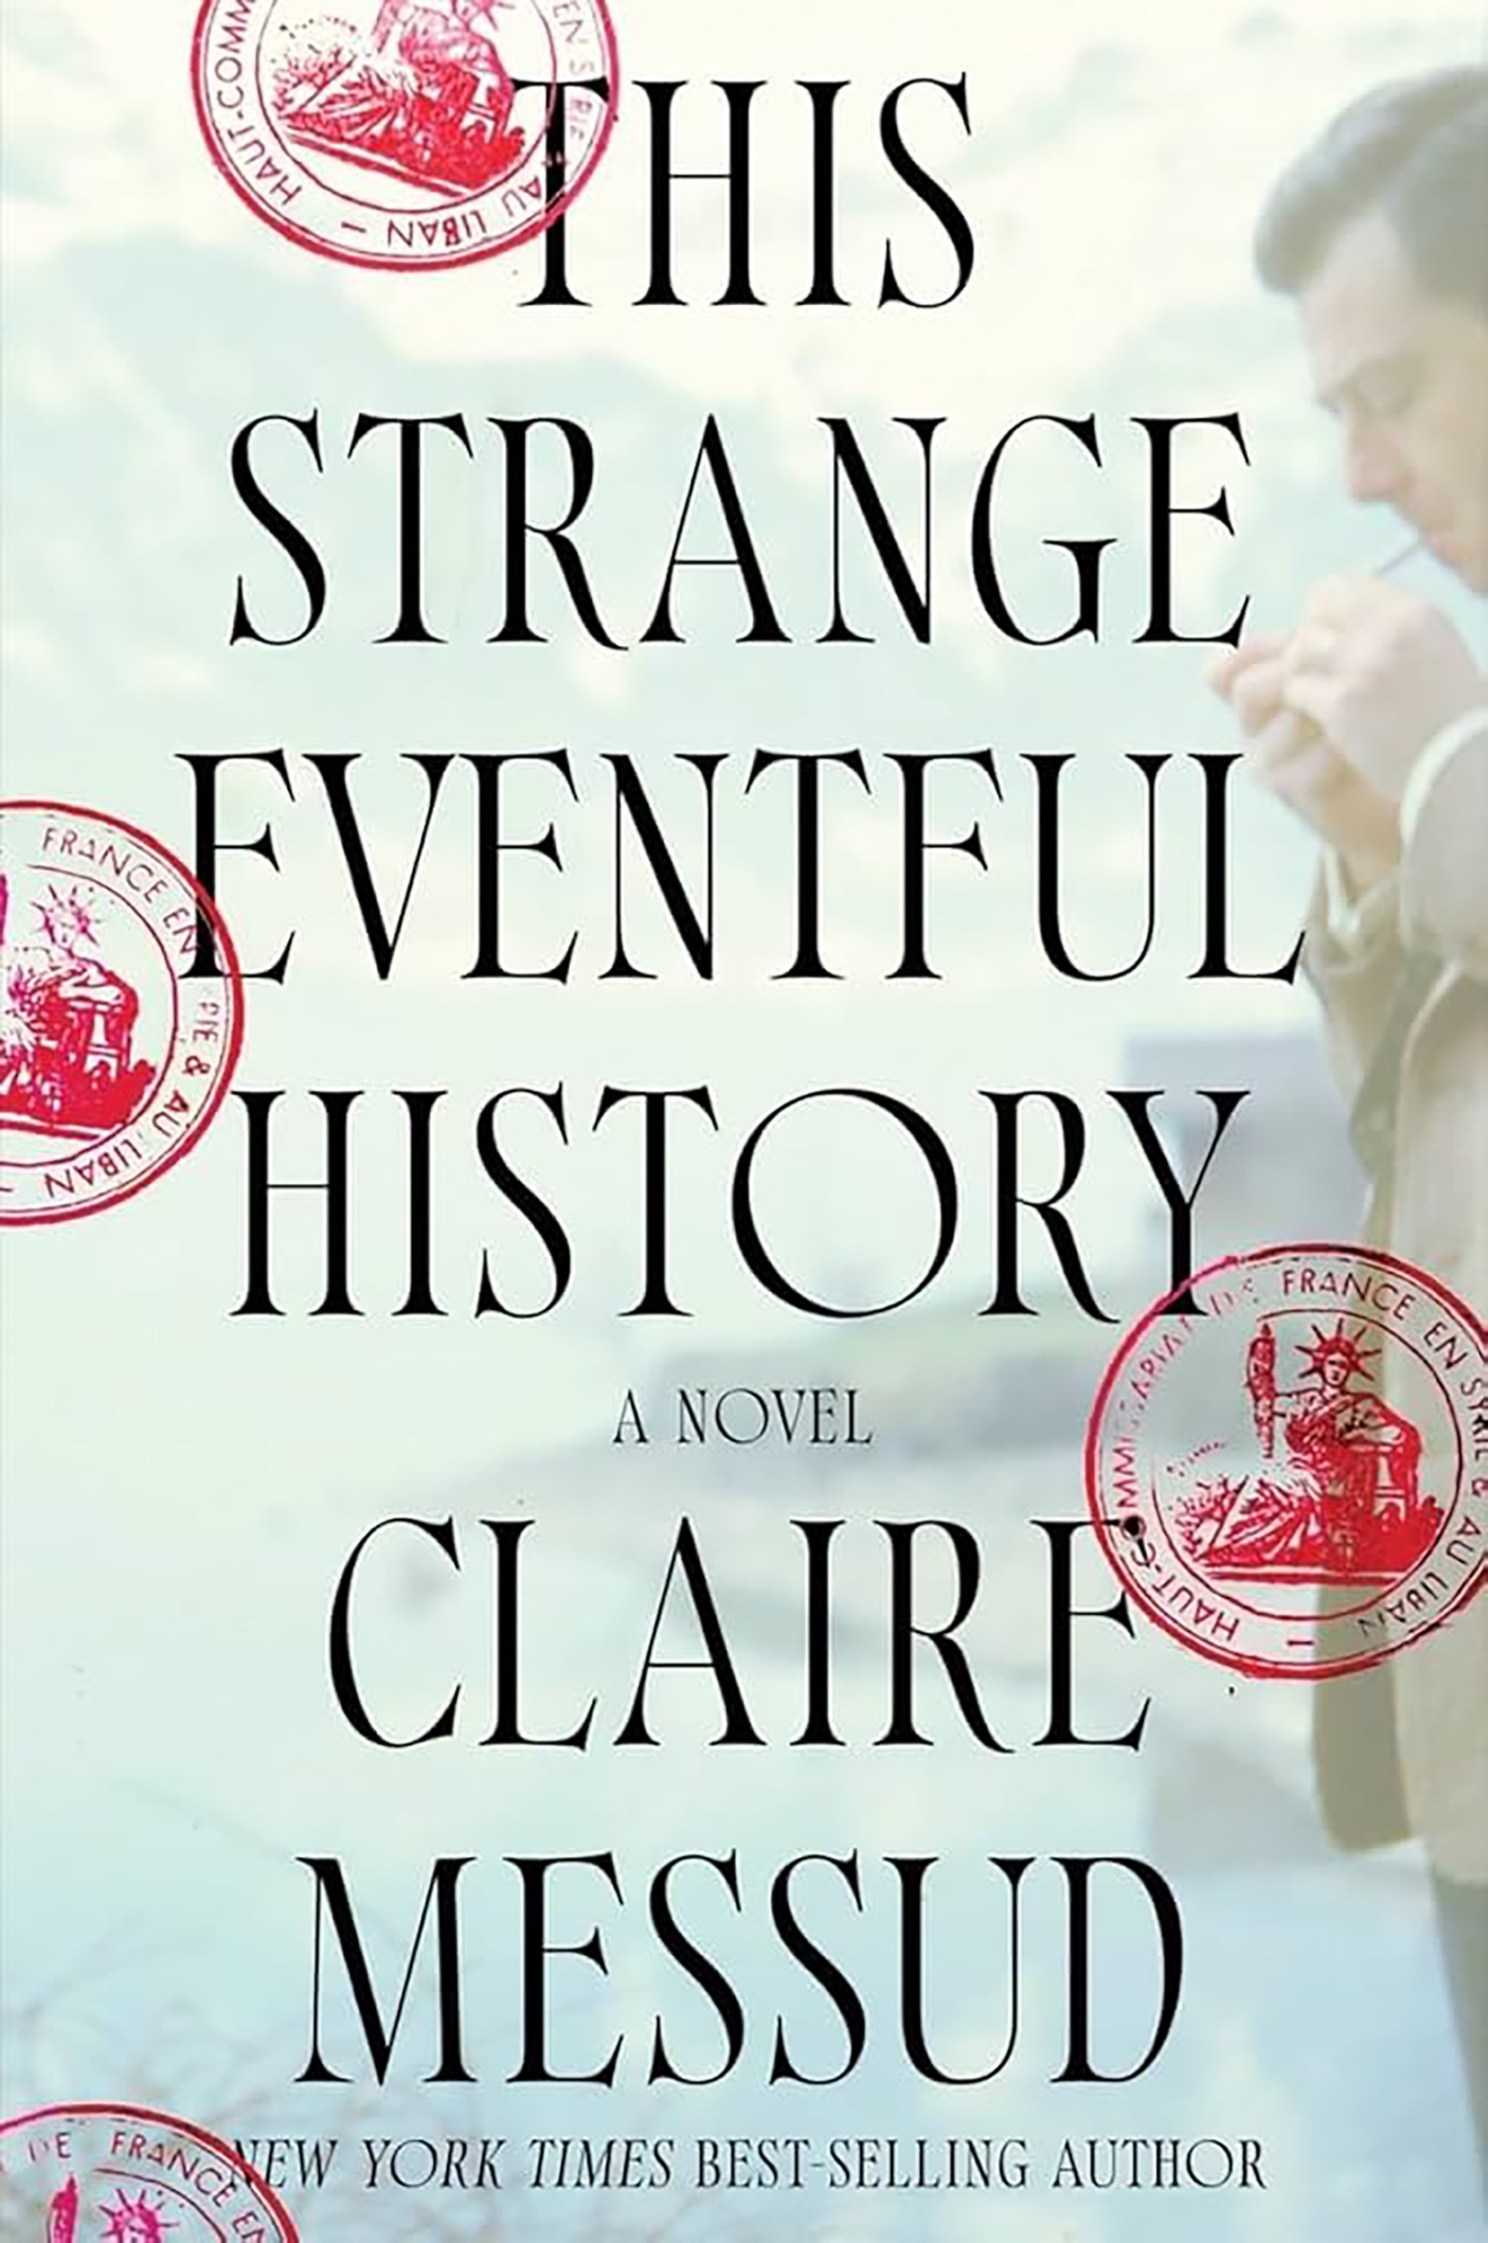 Book cover: "This Strange Eventful History."